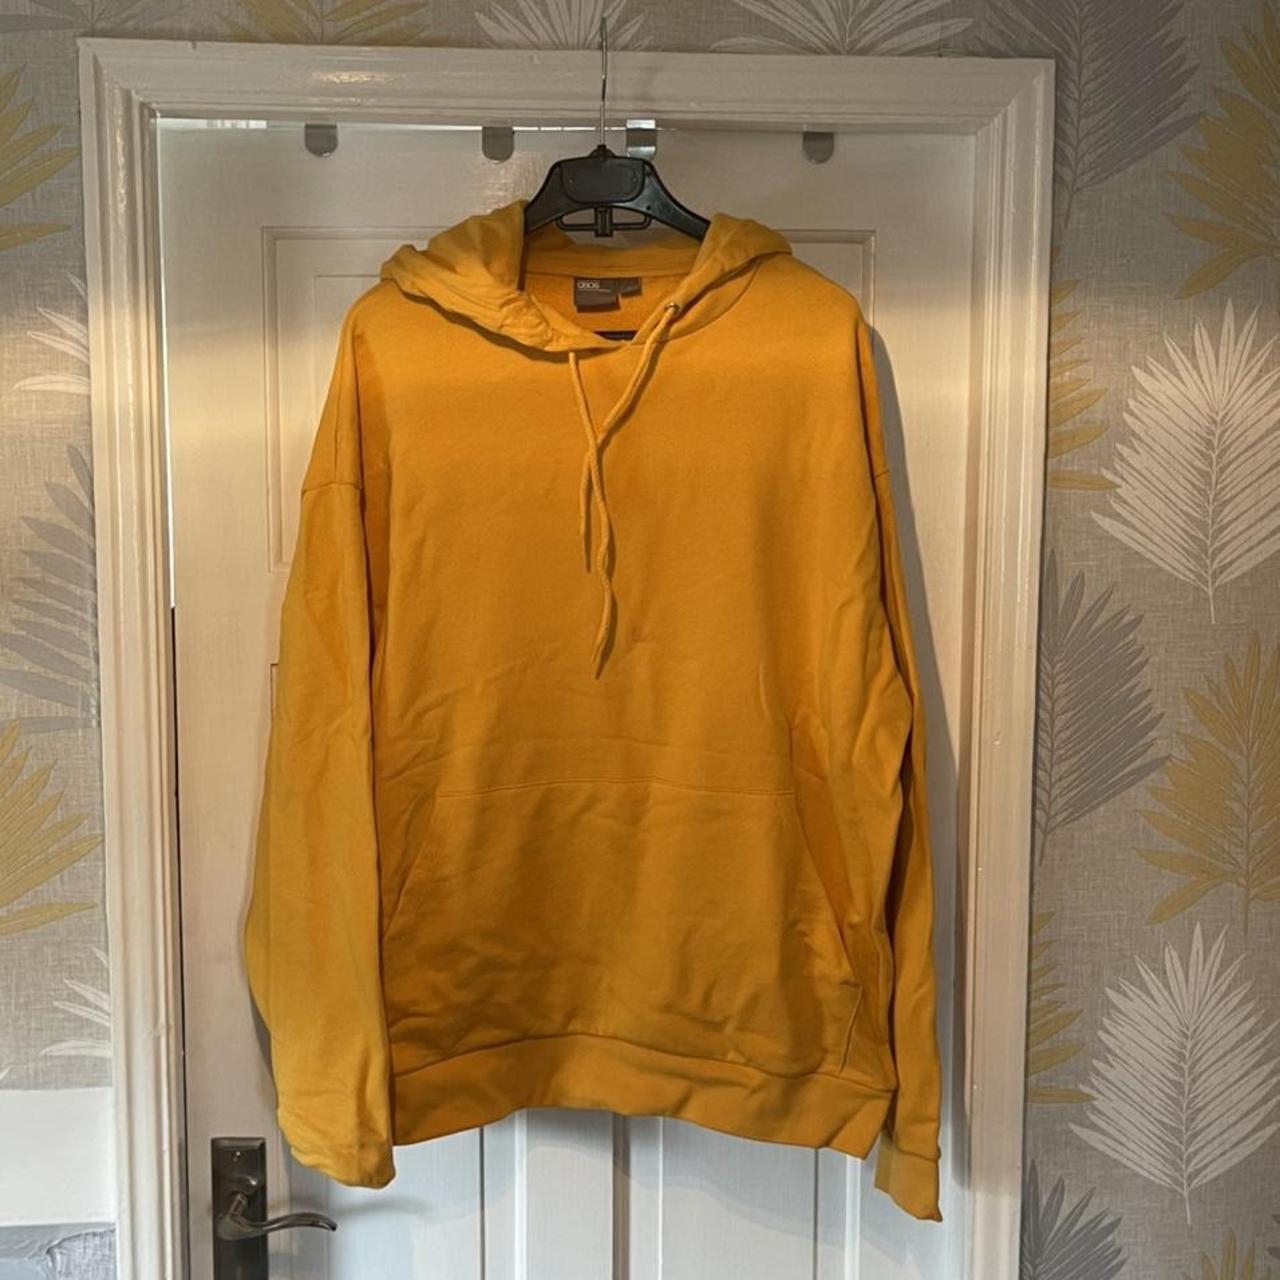 Asos yellow hoodie. Size M. Excellent condition. #asos - Depop